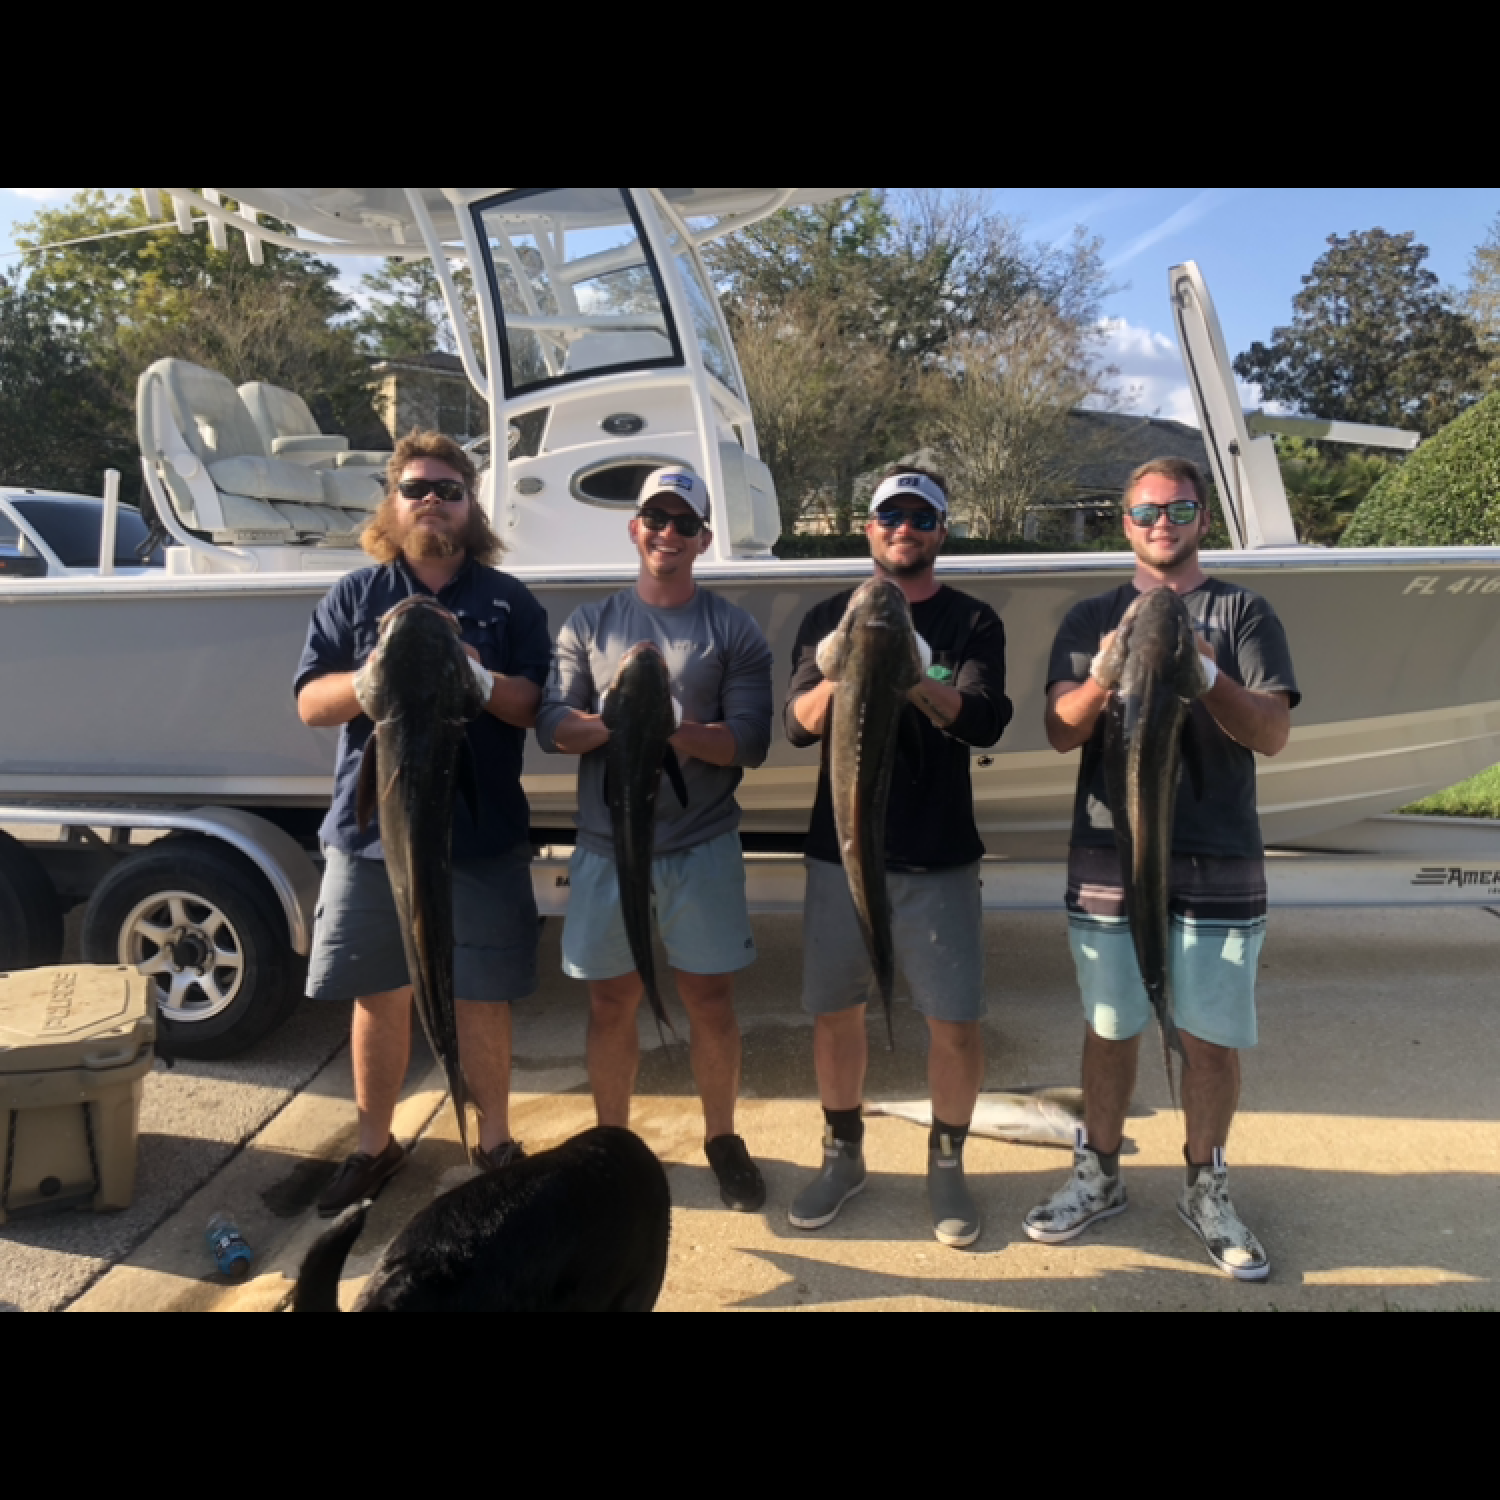 Title: Day of cobia fishing - On board their Sportsman Masters 267 Bay Boat - Location: St. Augustine Florida. Participating in the Photo Contest #SportsmanOctober2020